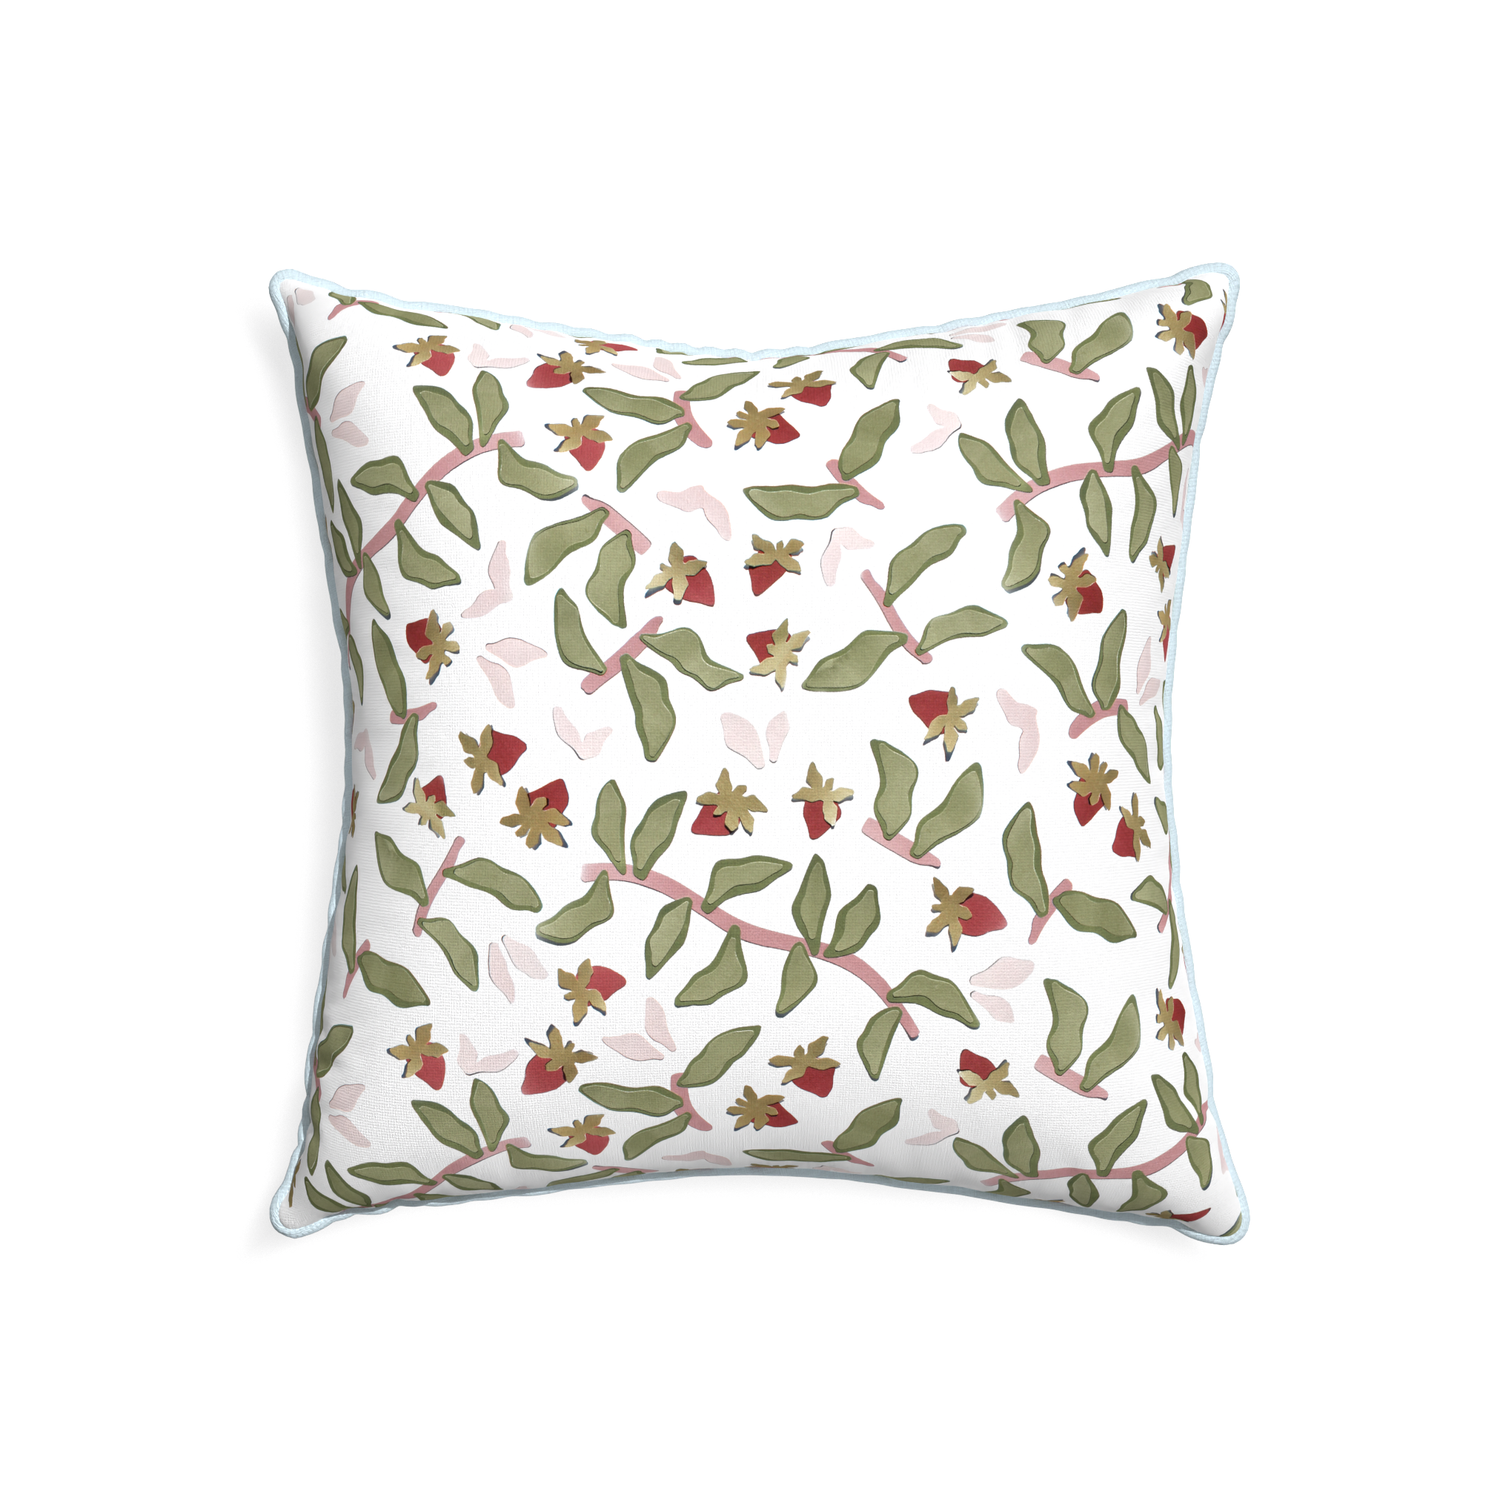 22-square nellie custom strawberry & botanicalpillow with powder piping on white background